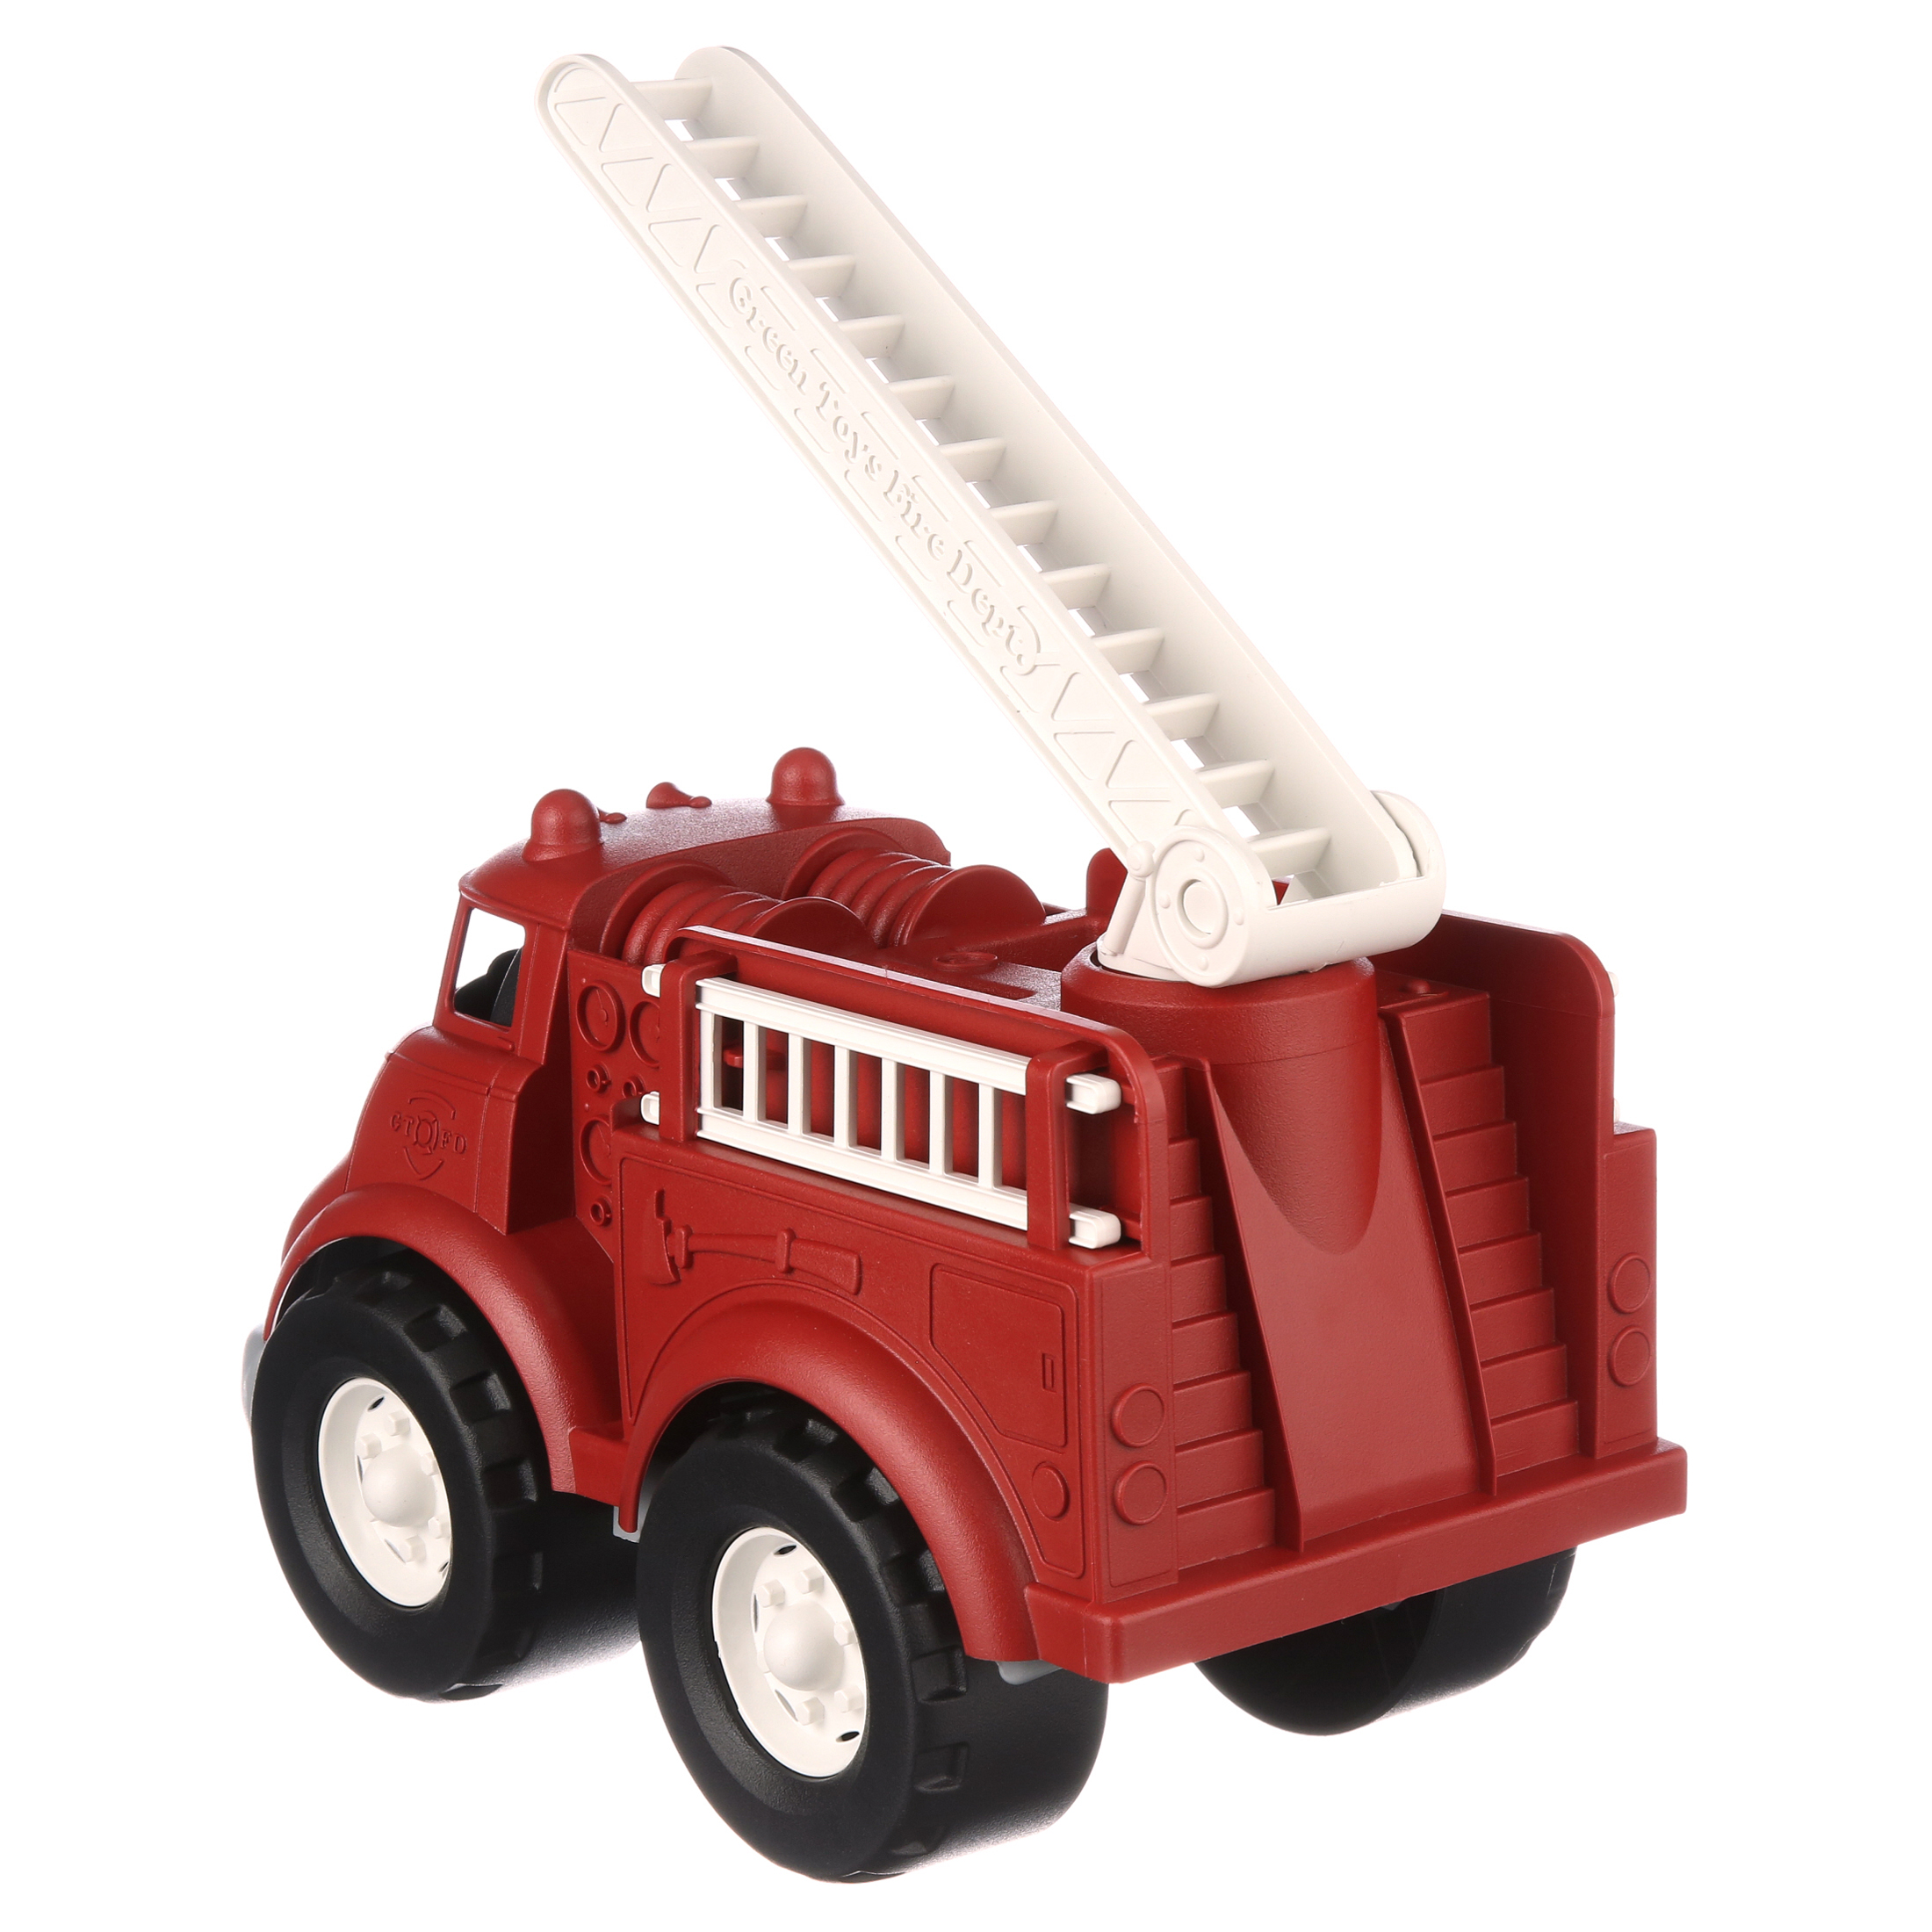 Green Toys Red Fire Truck Play Vehicle, 100% Recycled Plastic - Walmart.com